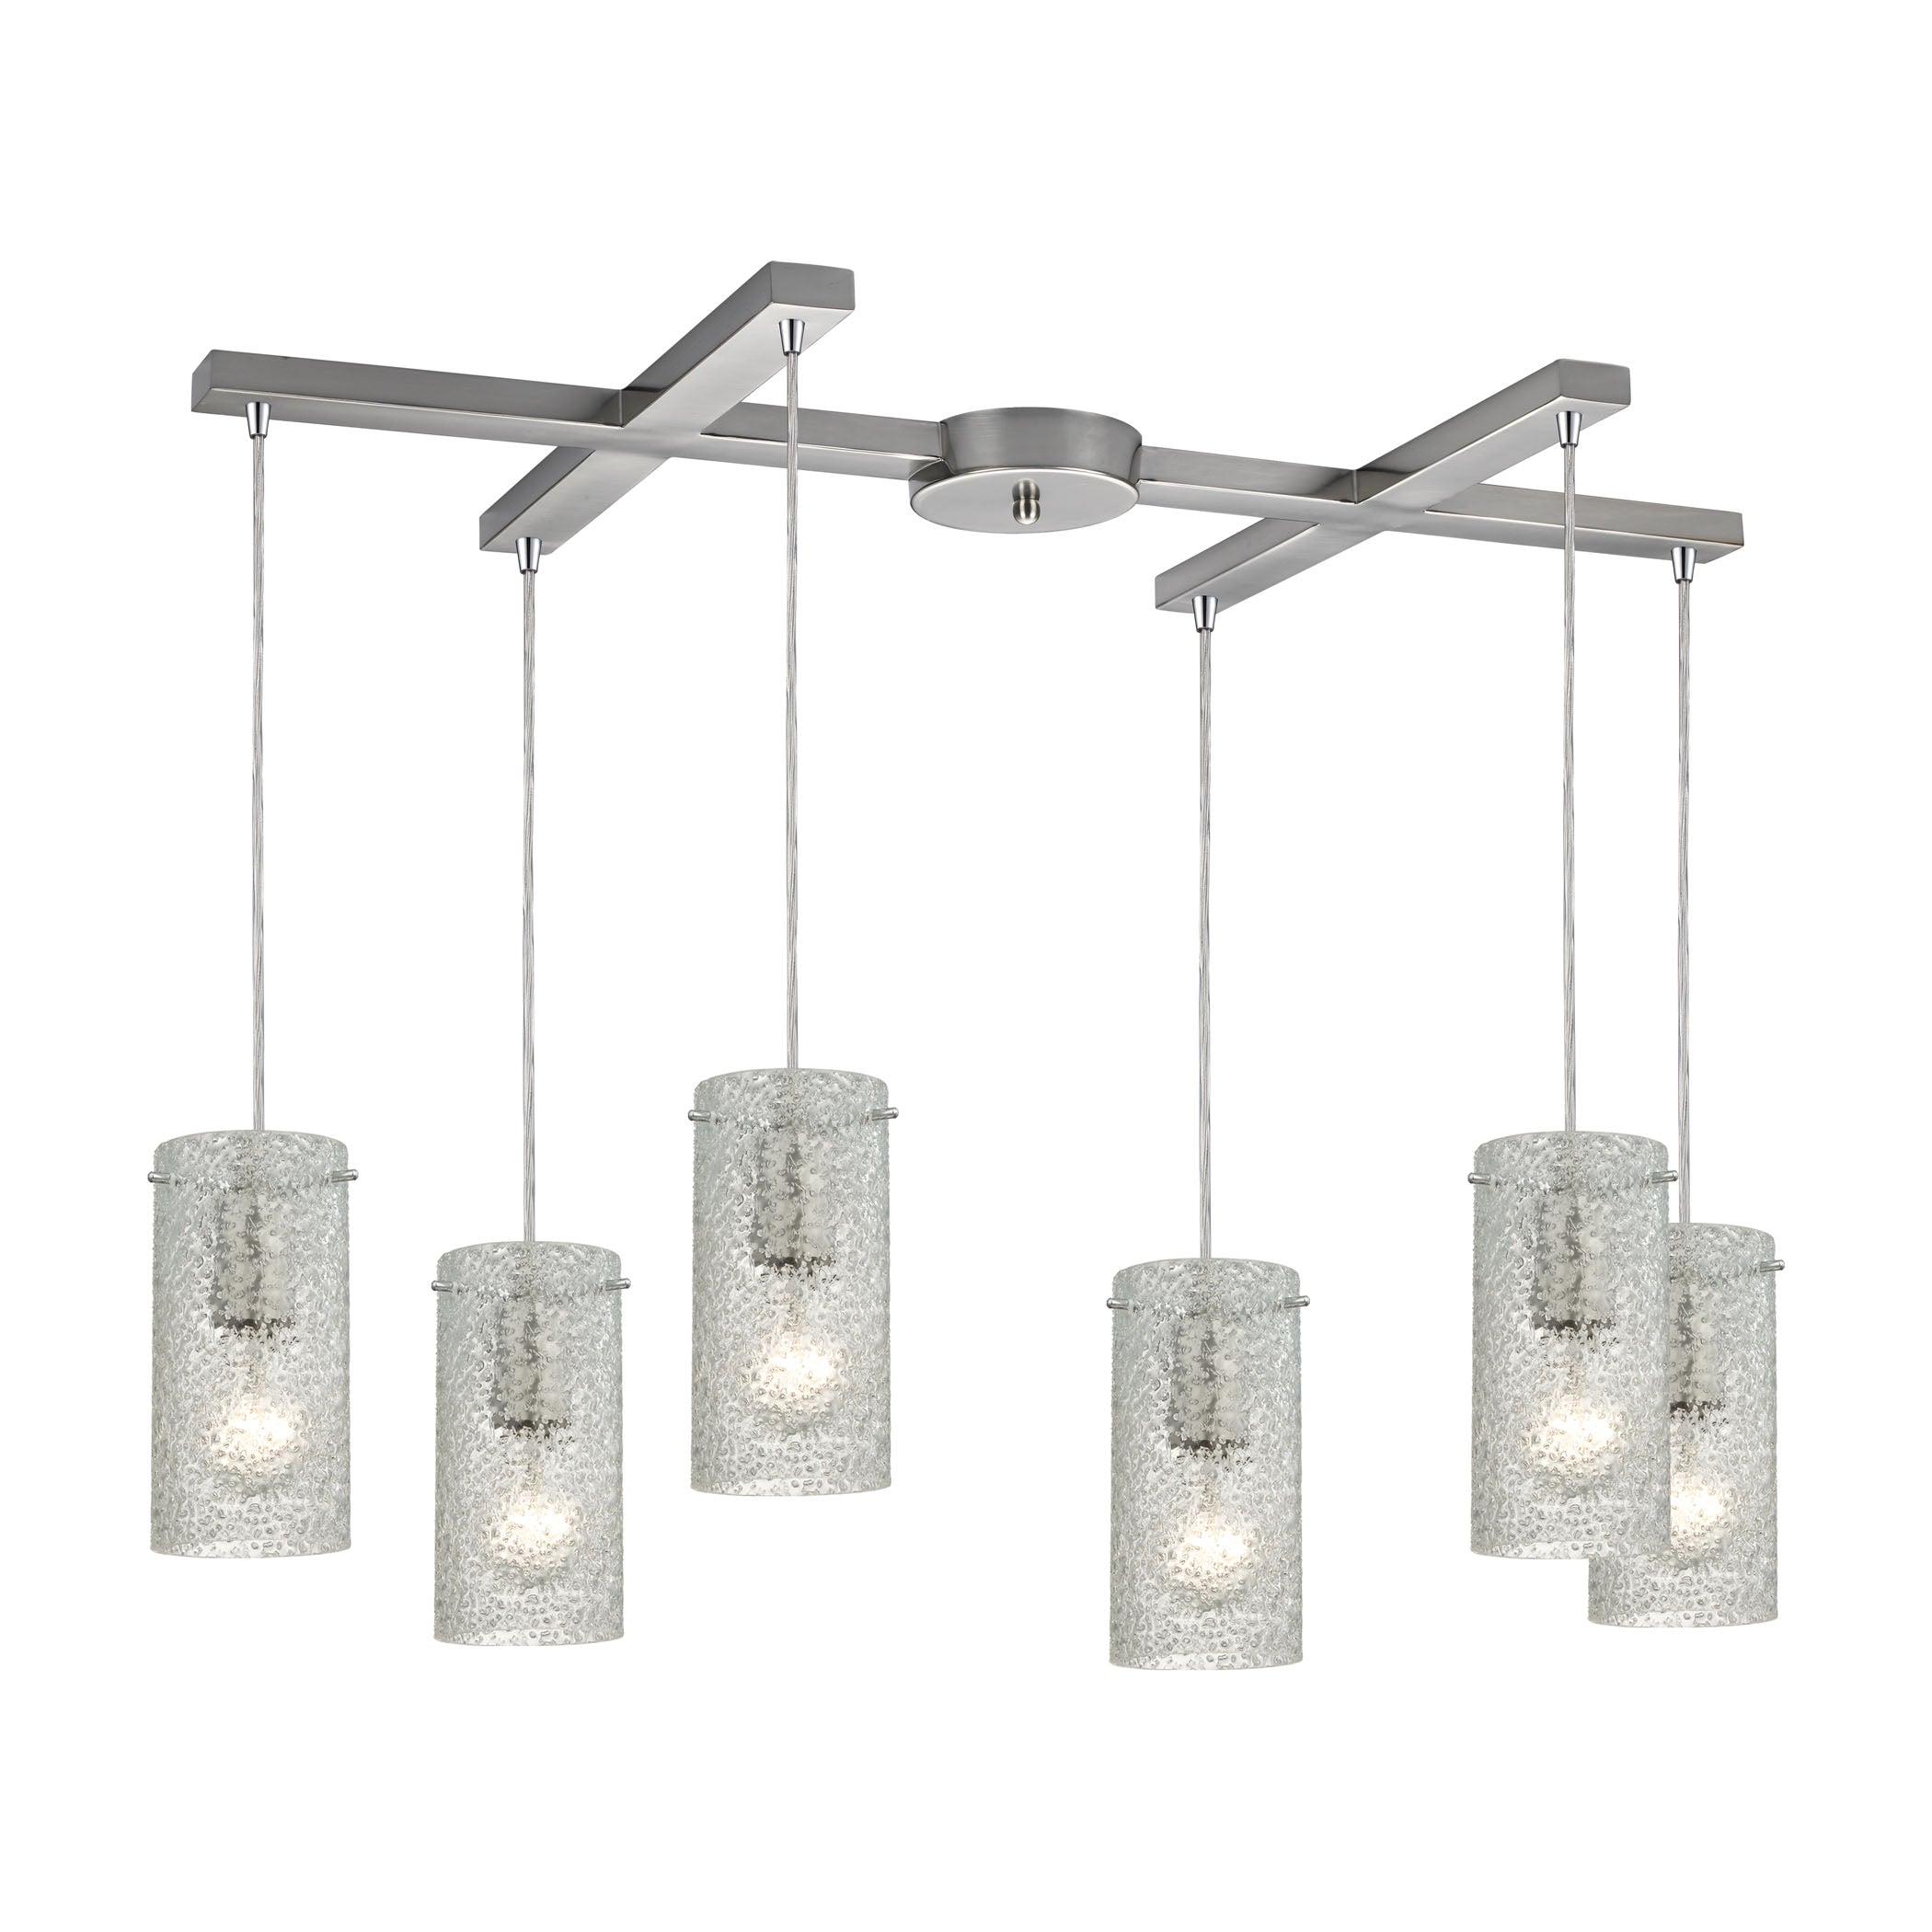 ELK Lighting 10242/6CL Ice Fragments 6-Light H-Bar Pendant Fixture in Satin Nickel with Clear Glass